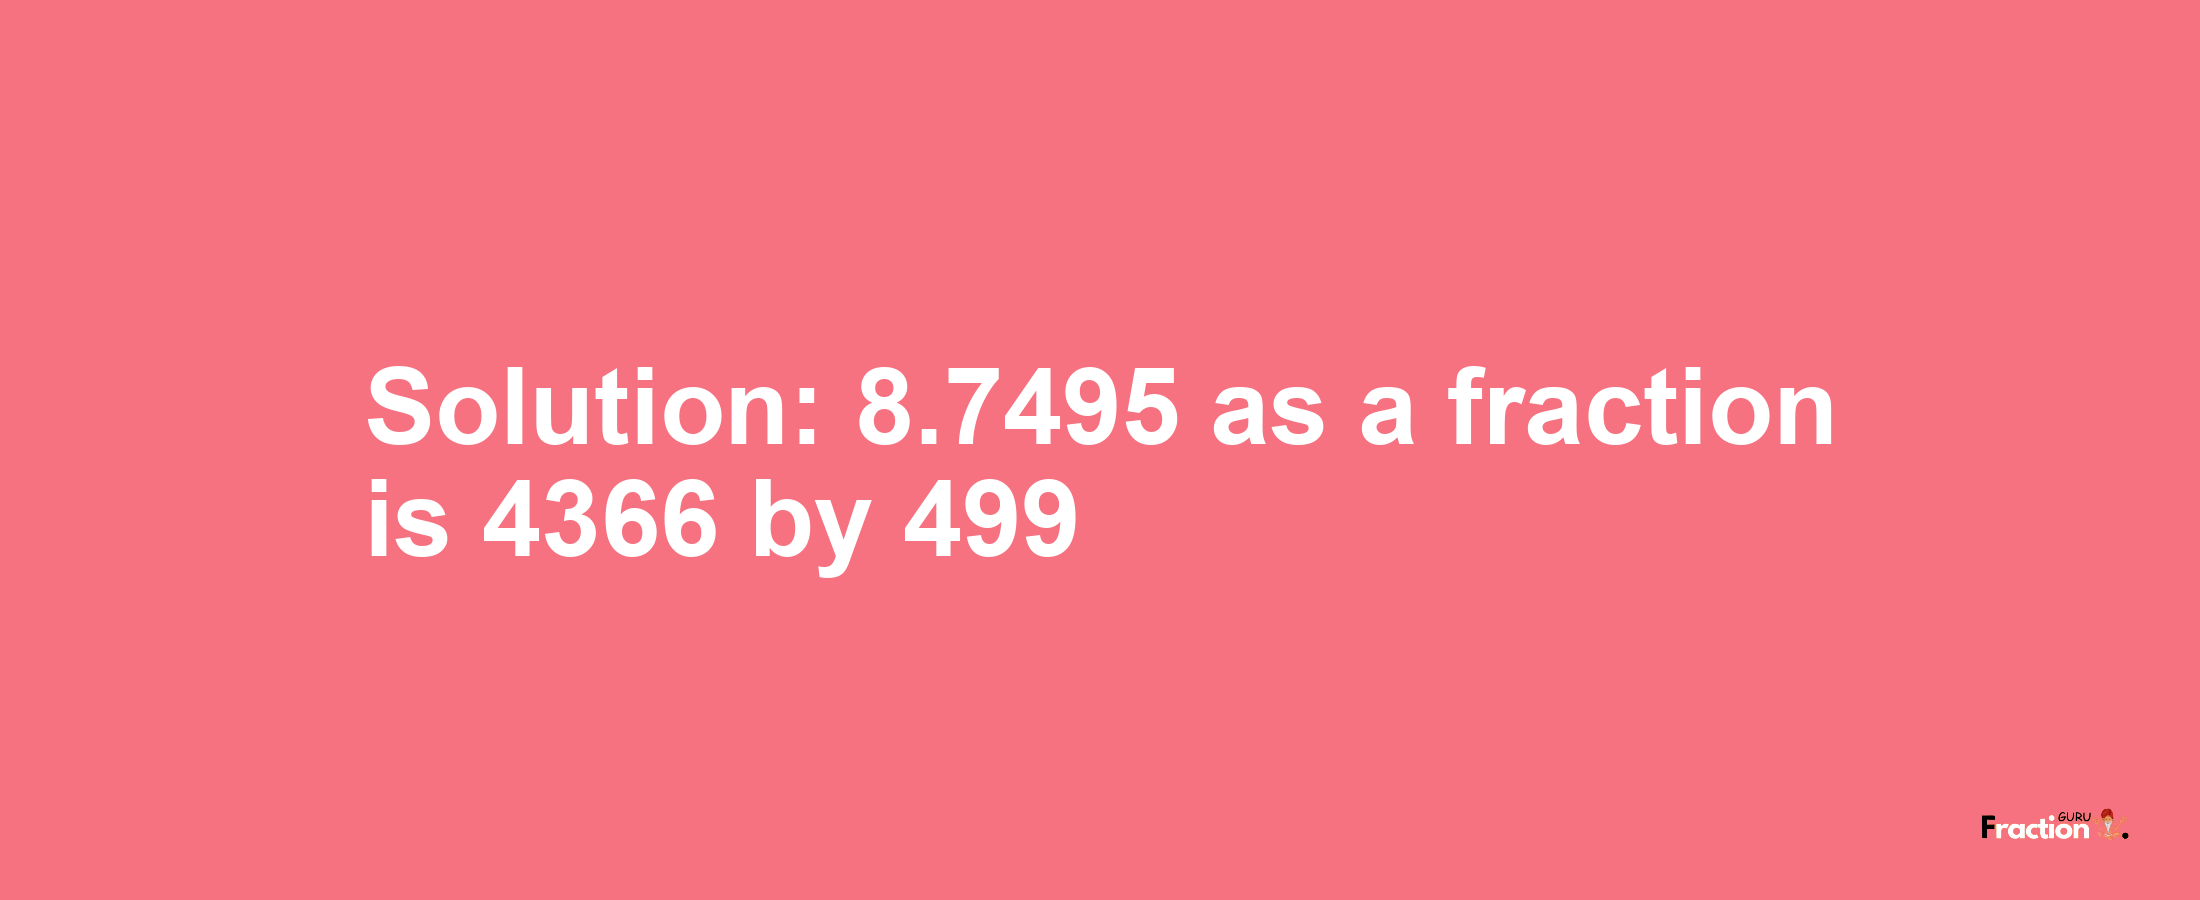 Solution:8.7495 as a fraction is 4366/499